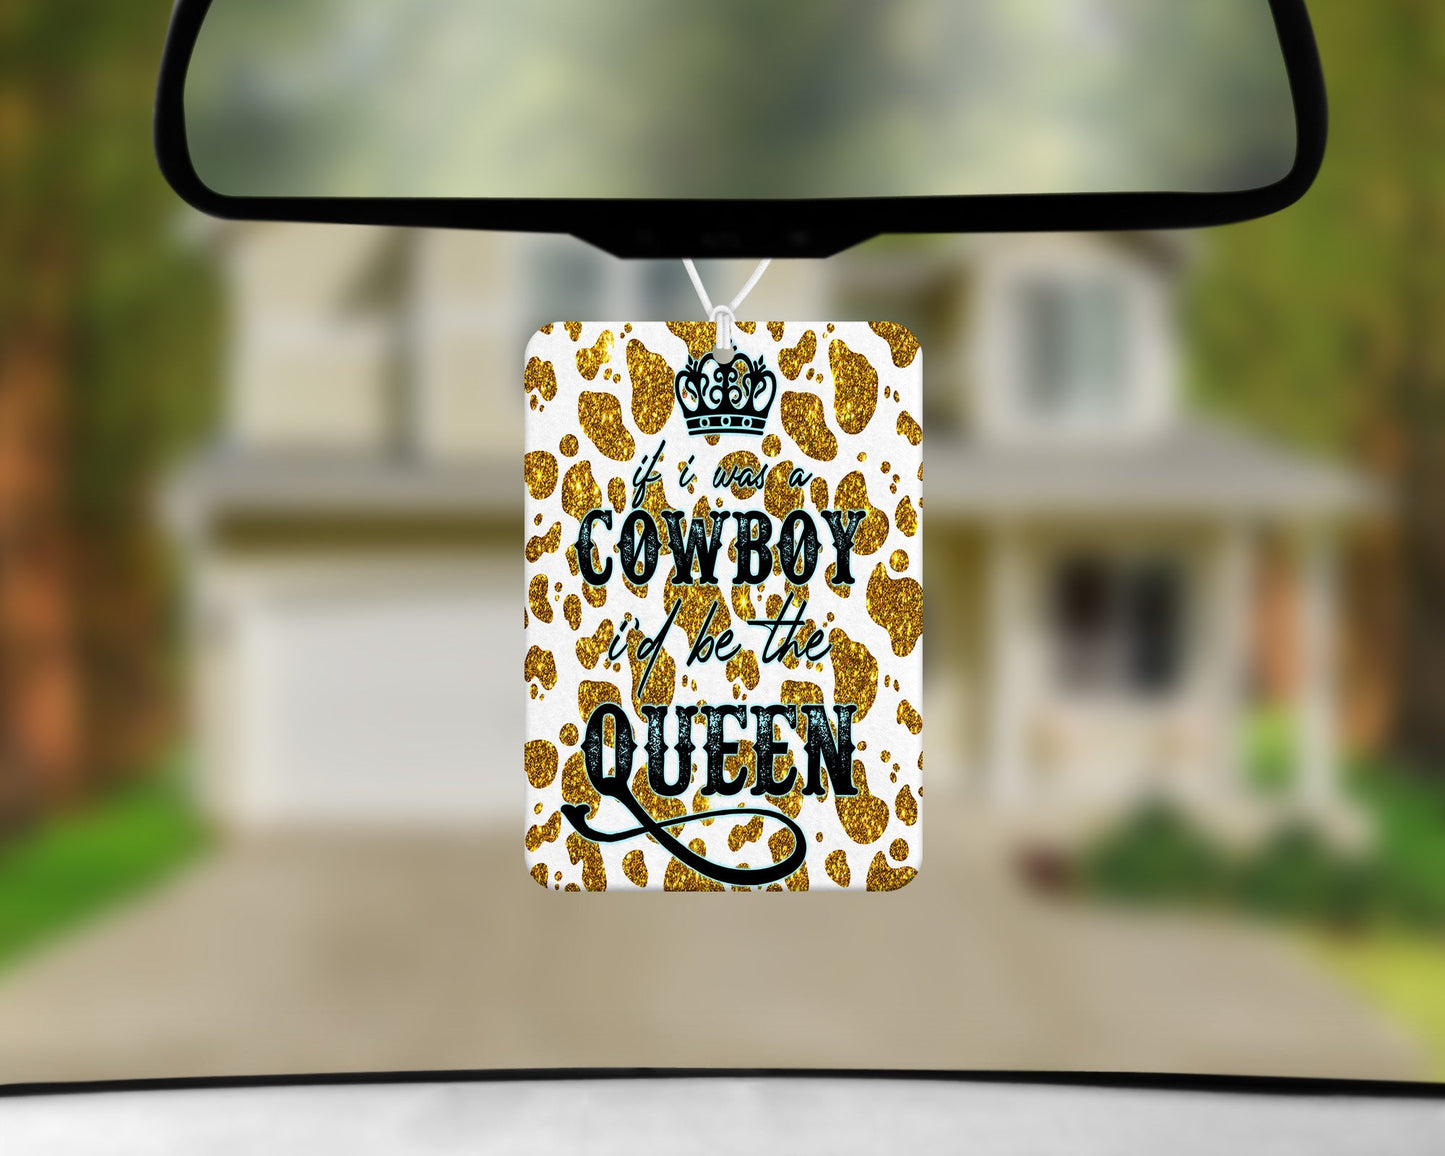 If I Was a Cowboy I’d Be The Queen|Freshie|Includes Scent Bottle - Vehicle Air Freshener